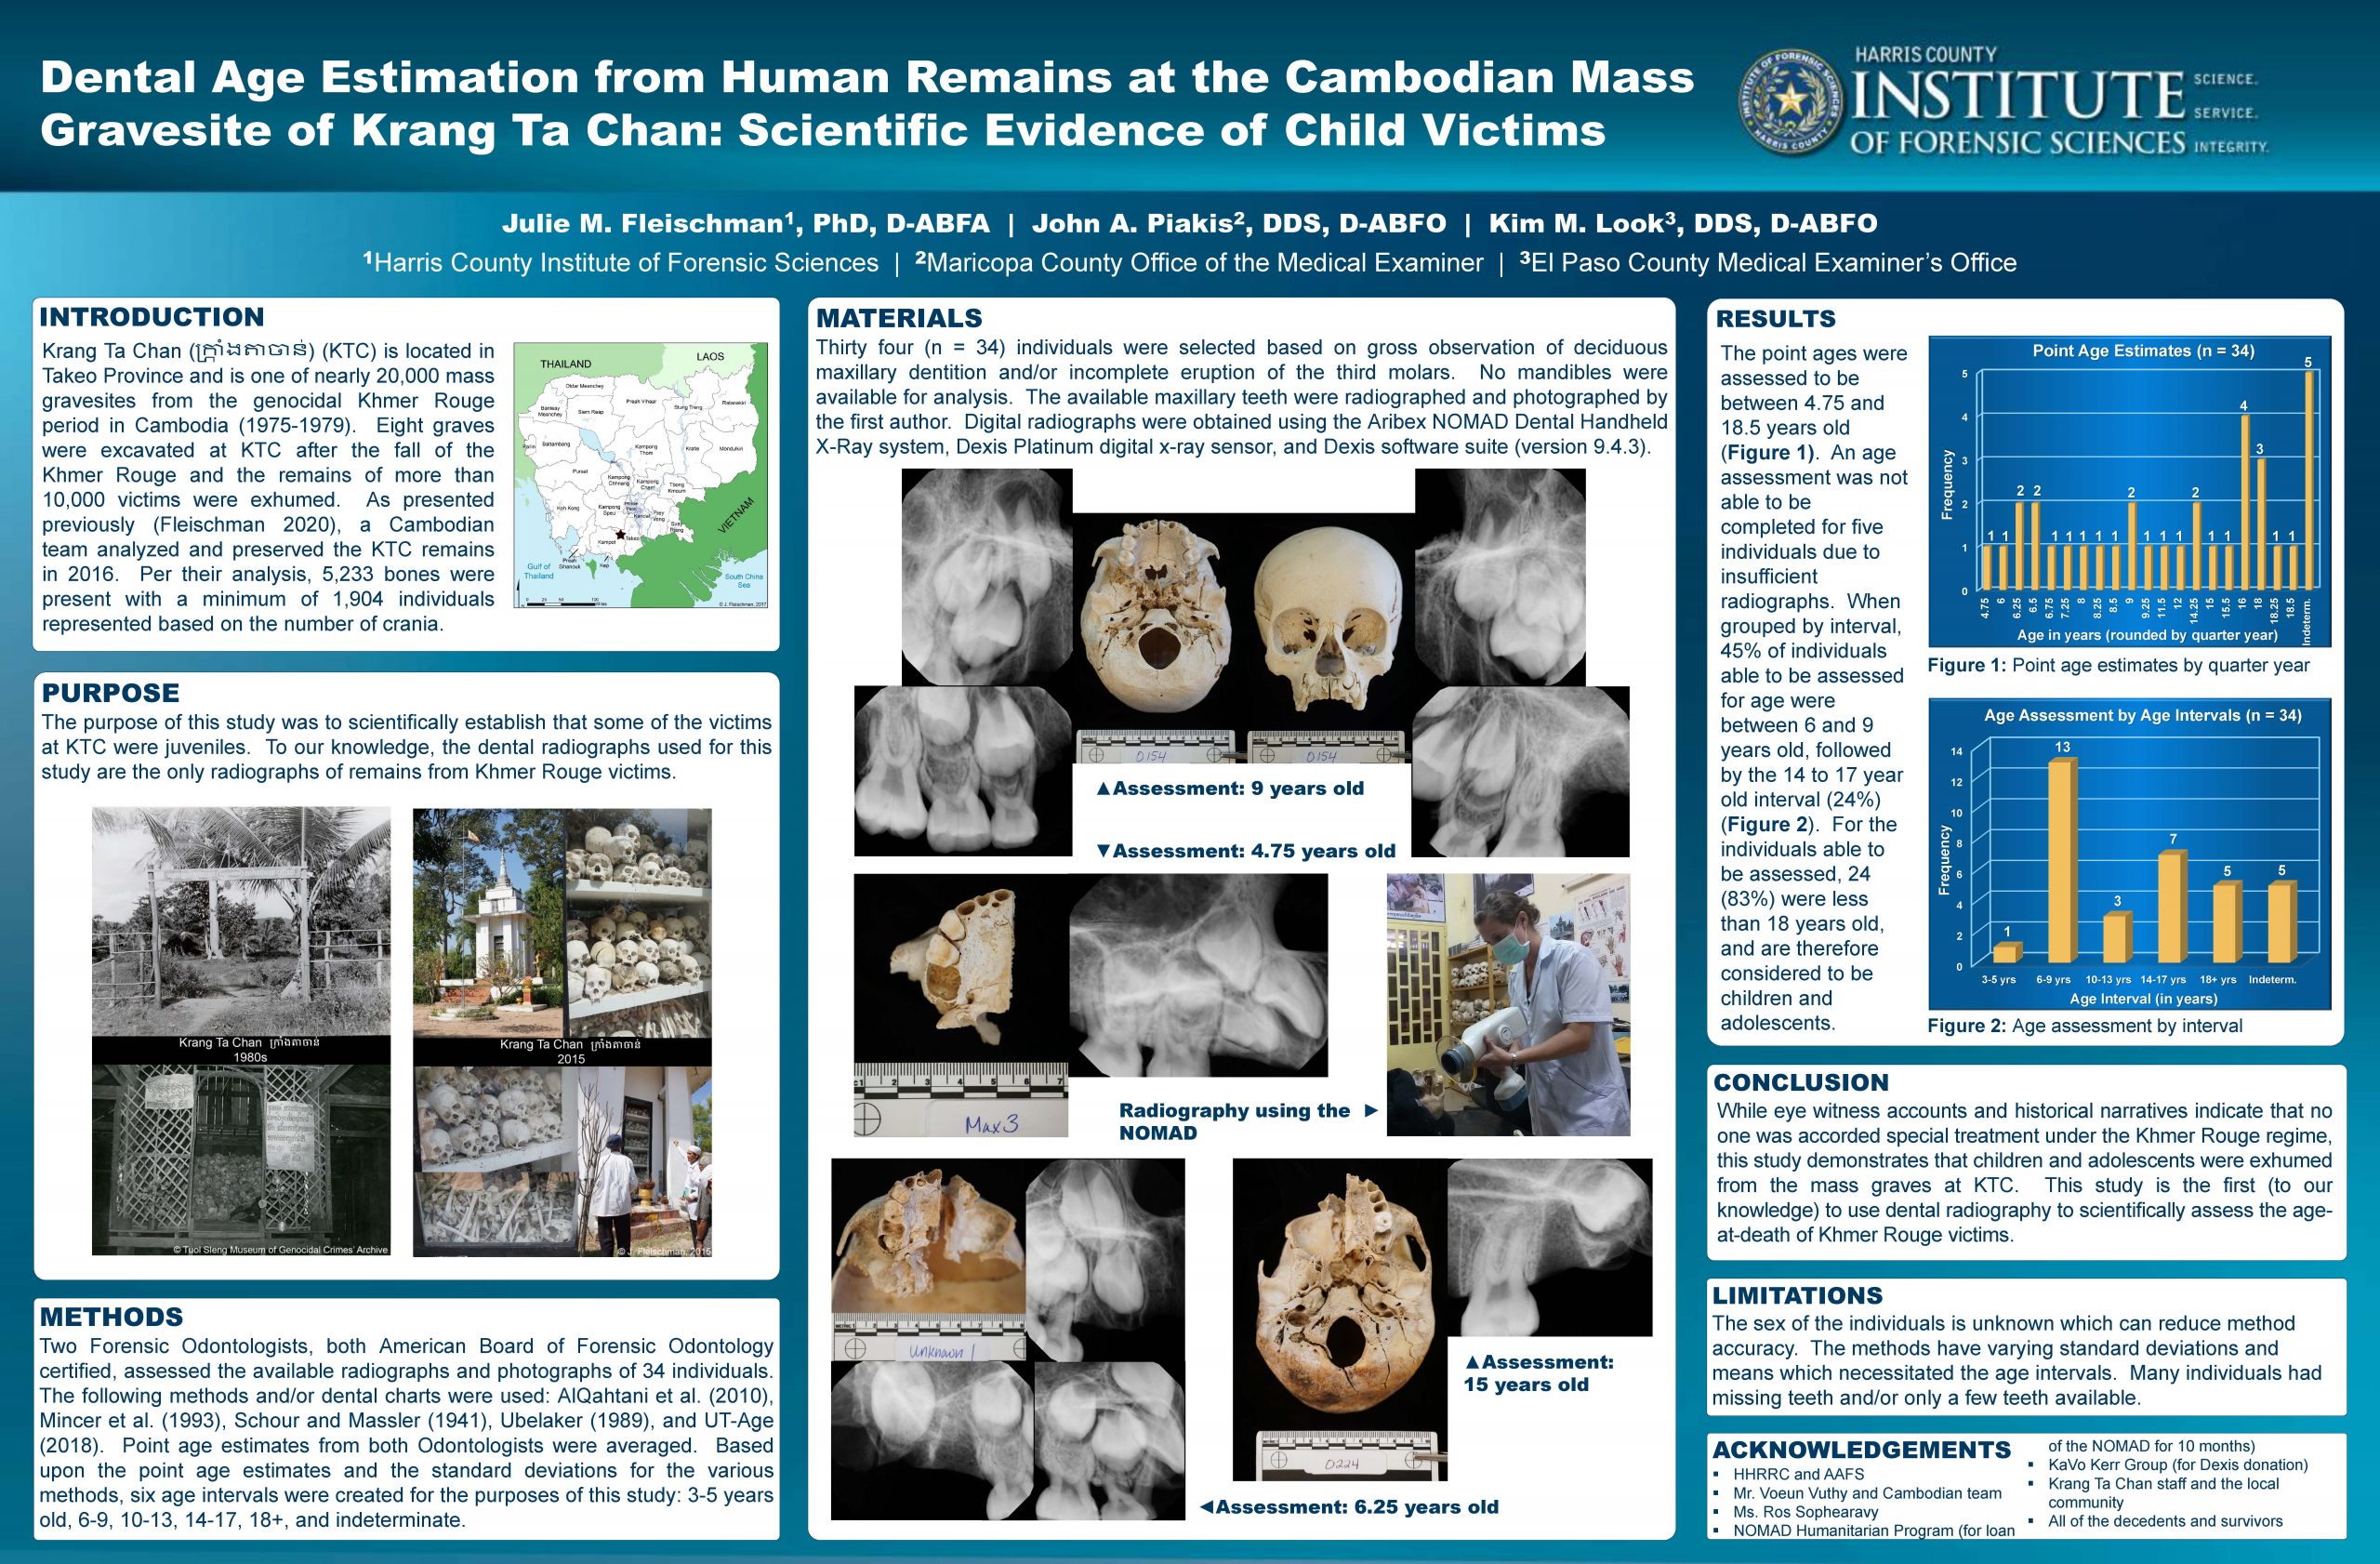 Dental Age Estimation from Human Remains at the Cambodian Mass Gravesite of Krang Ta Chan Scientific Evidence of Child Victims